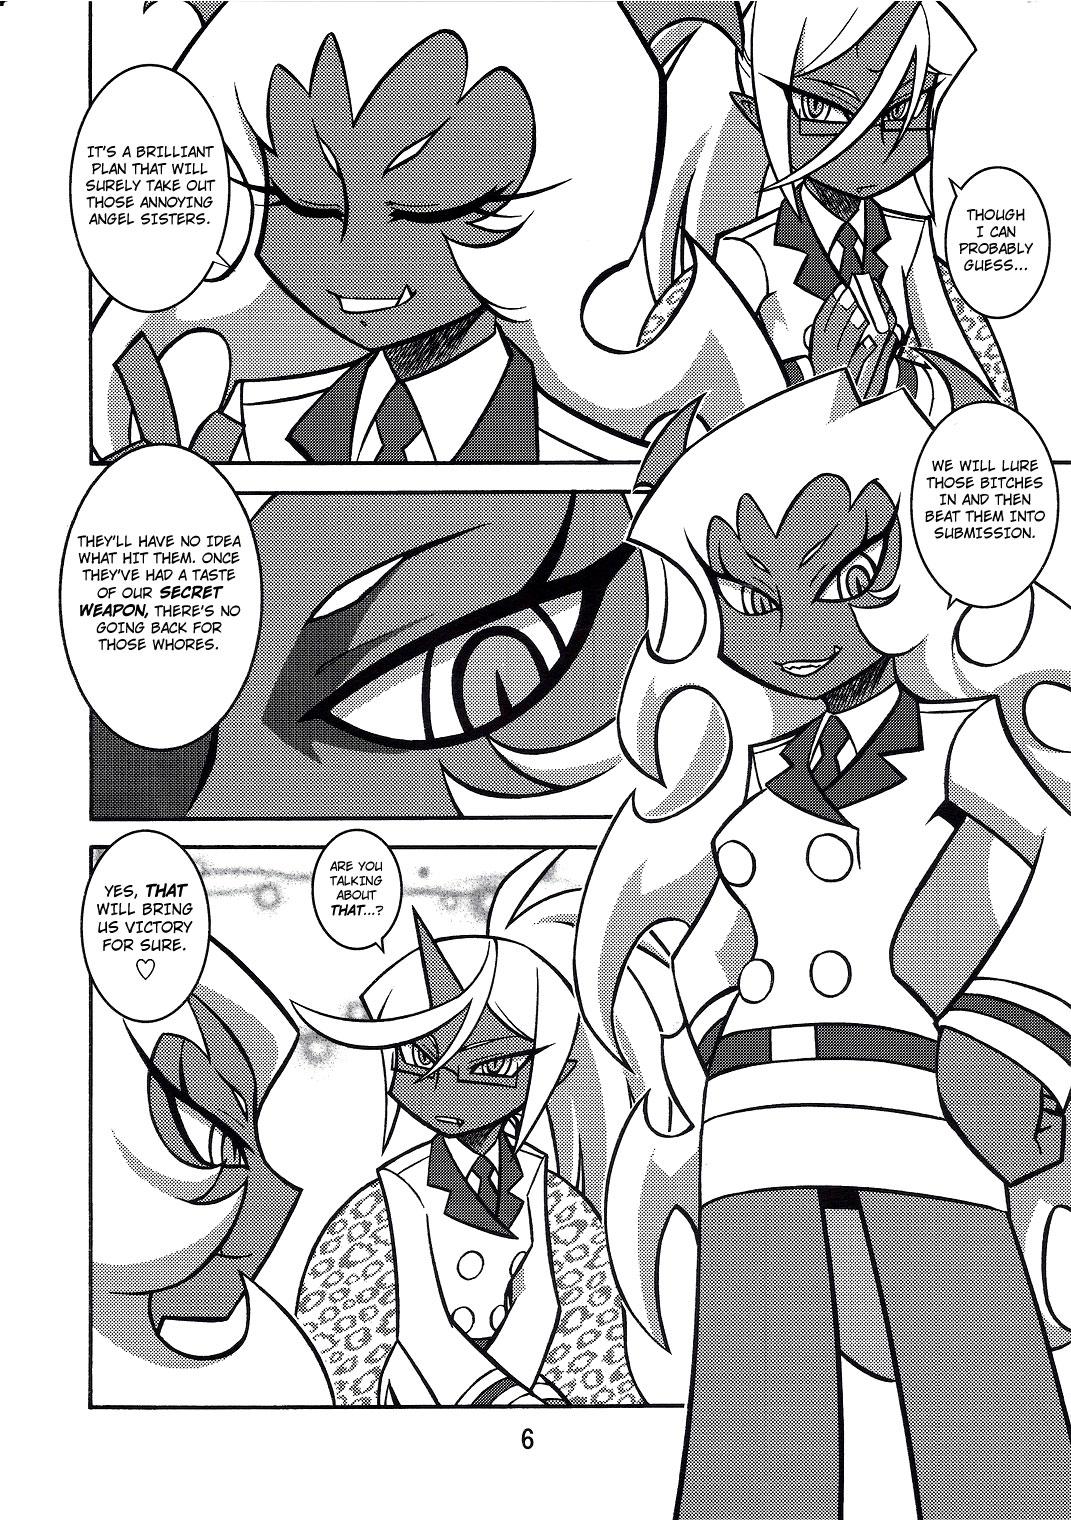 Rough NIGHT HEAD S&K - Panty and stocking with garterbelt Role Play - Page 5